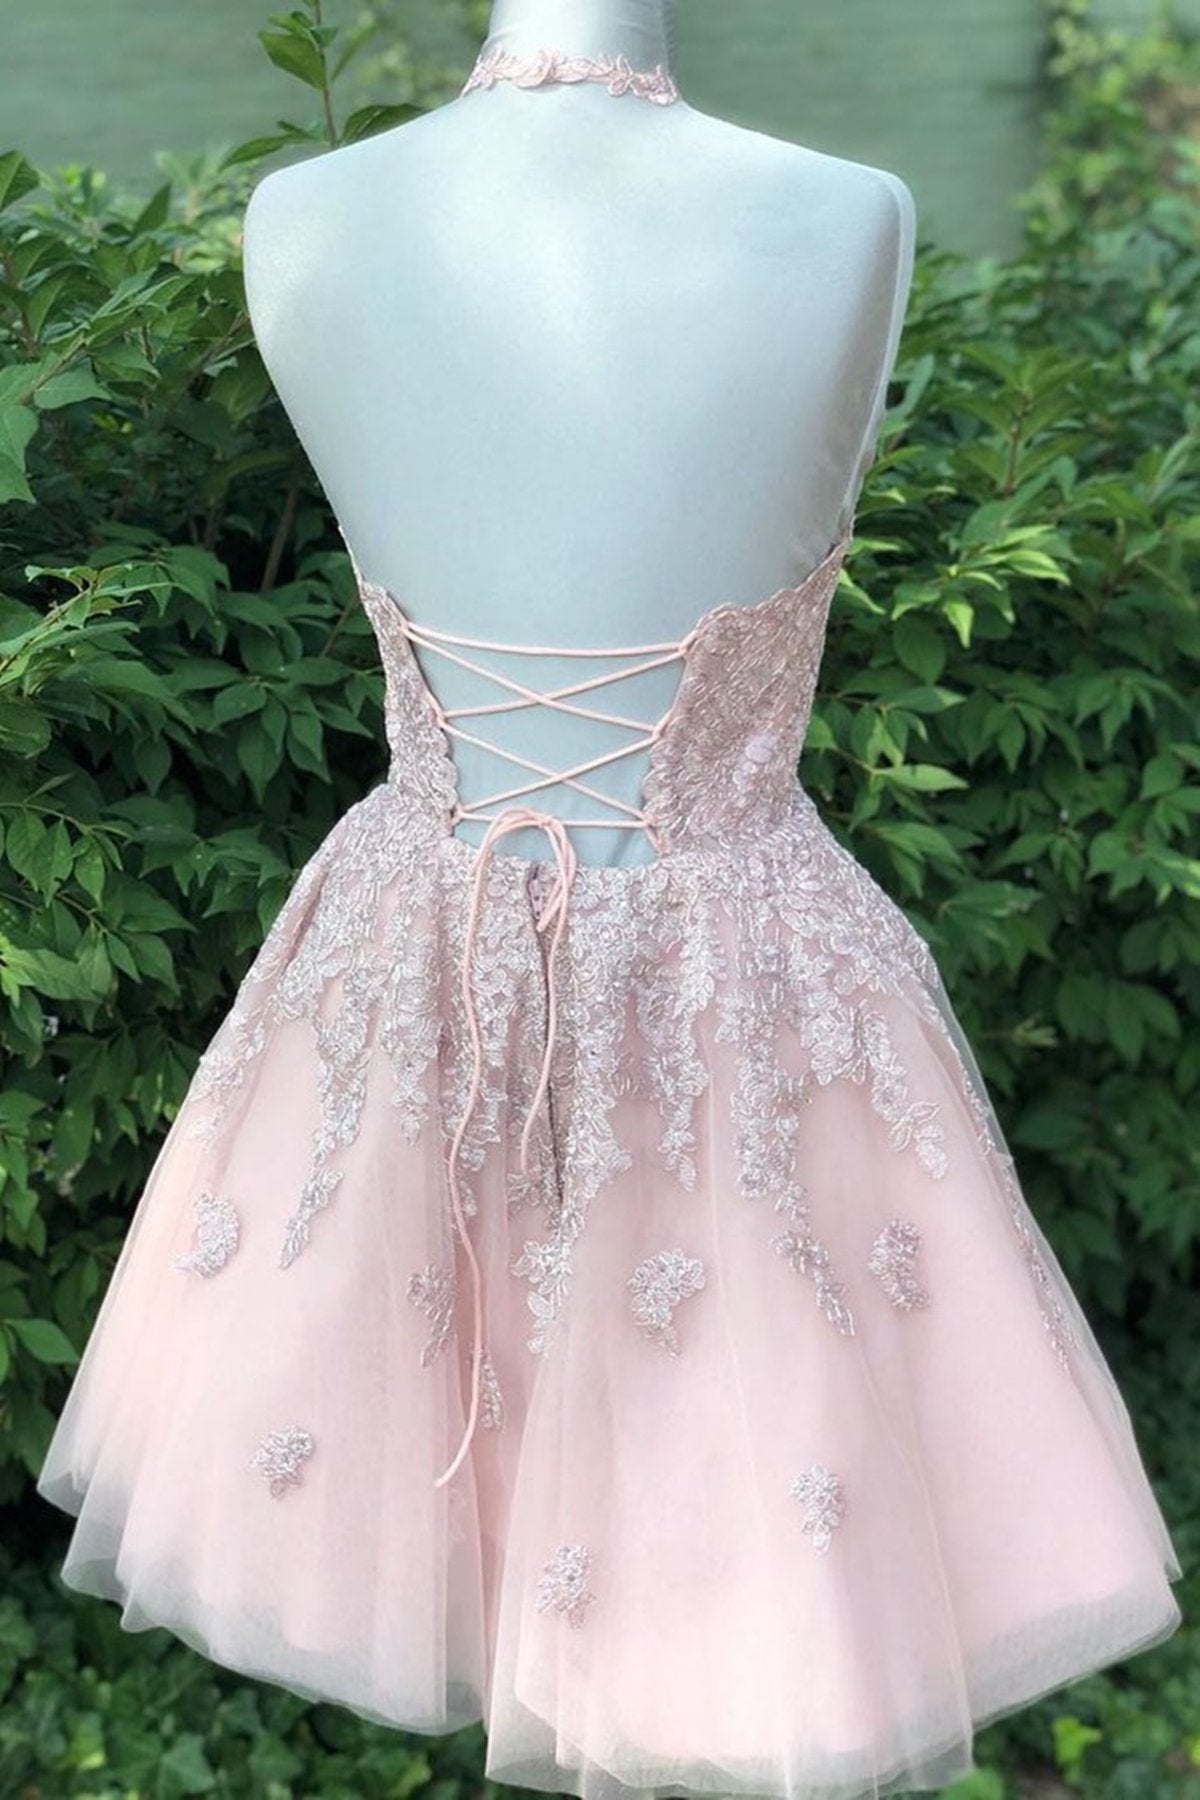 Party Dress Renswoude, Short Halter Neck Pink Lace Prom Dresses, Halter Neck Short Pink Lace Graduation Homecoming Dresses